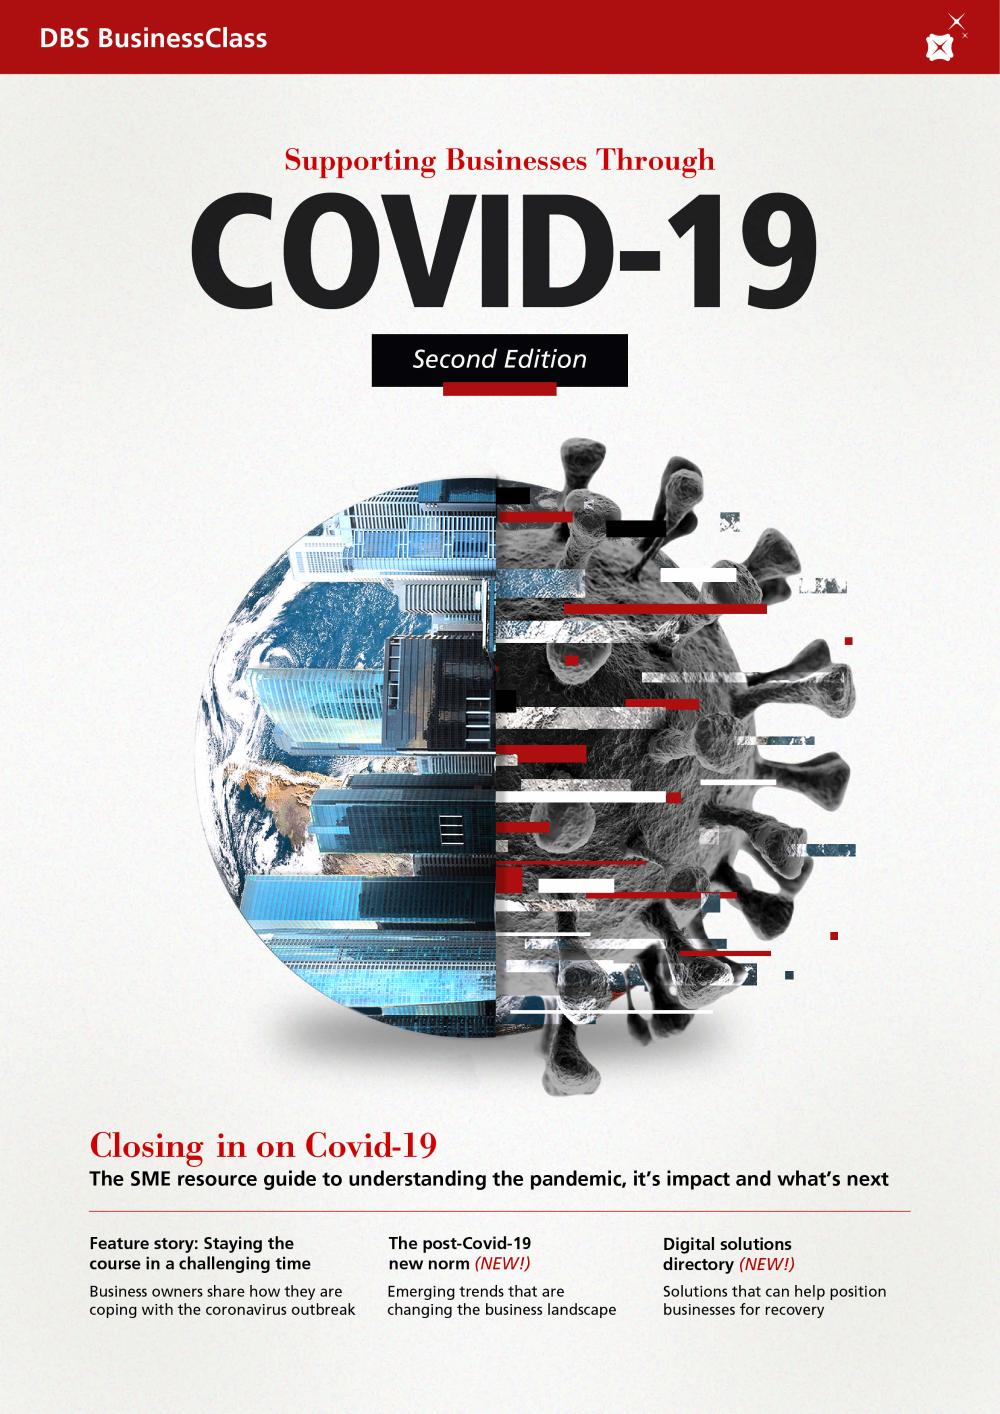 dbs second edition of supporting business through covid-19 poster